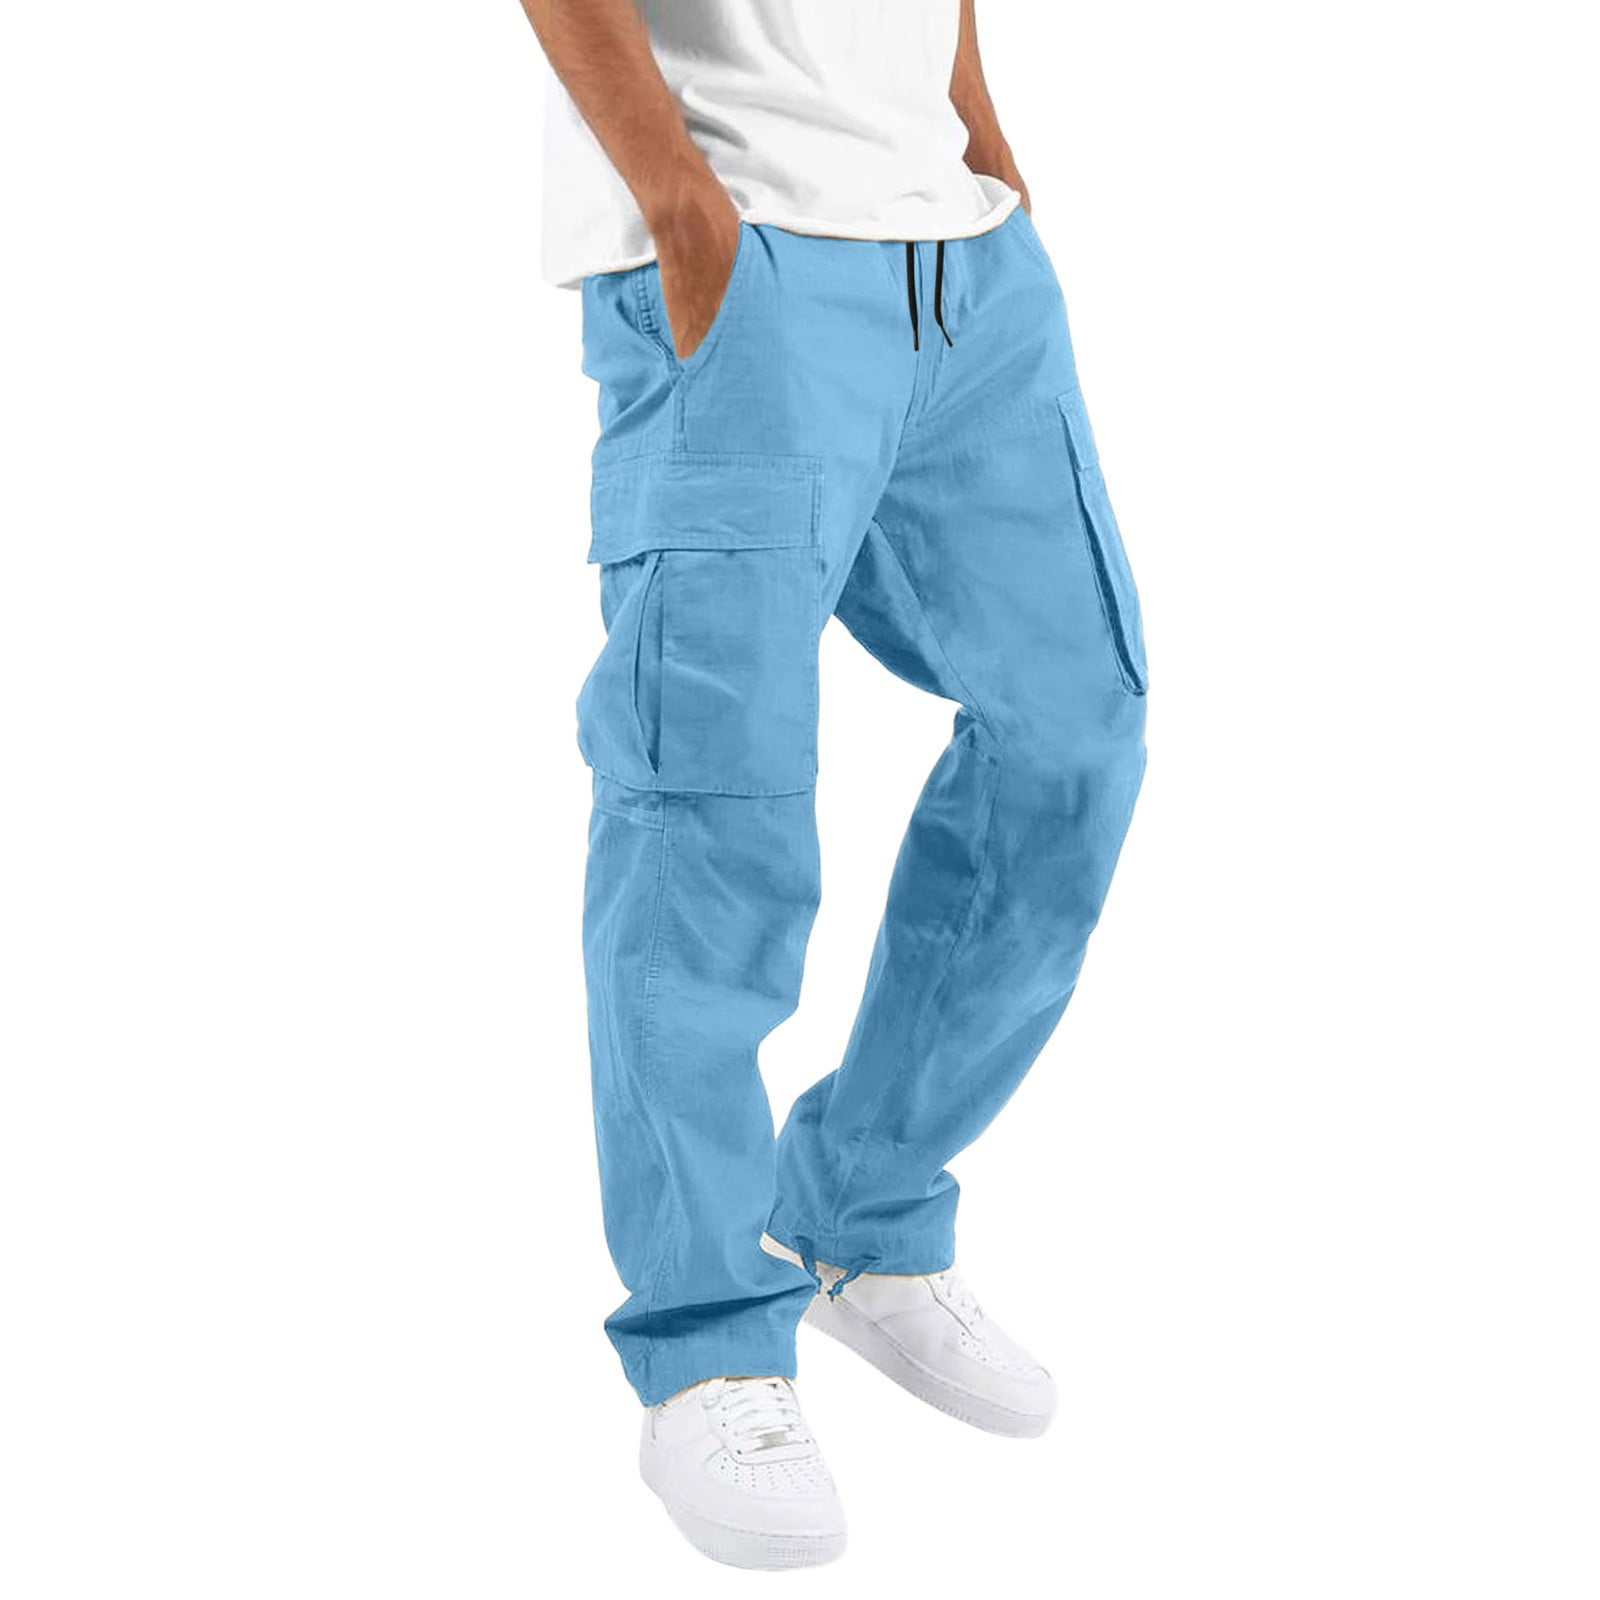 Buy Men's Casual Lycra Pants Stretchable Casual Less Weight Pants for Men  Slim Fit Wear Trousers for Office/Outdoor/Travelling/Fashion Dress Trouser  with Expandable Waist (Small) Sky Blue at Amazon.in